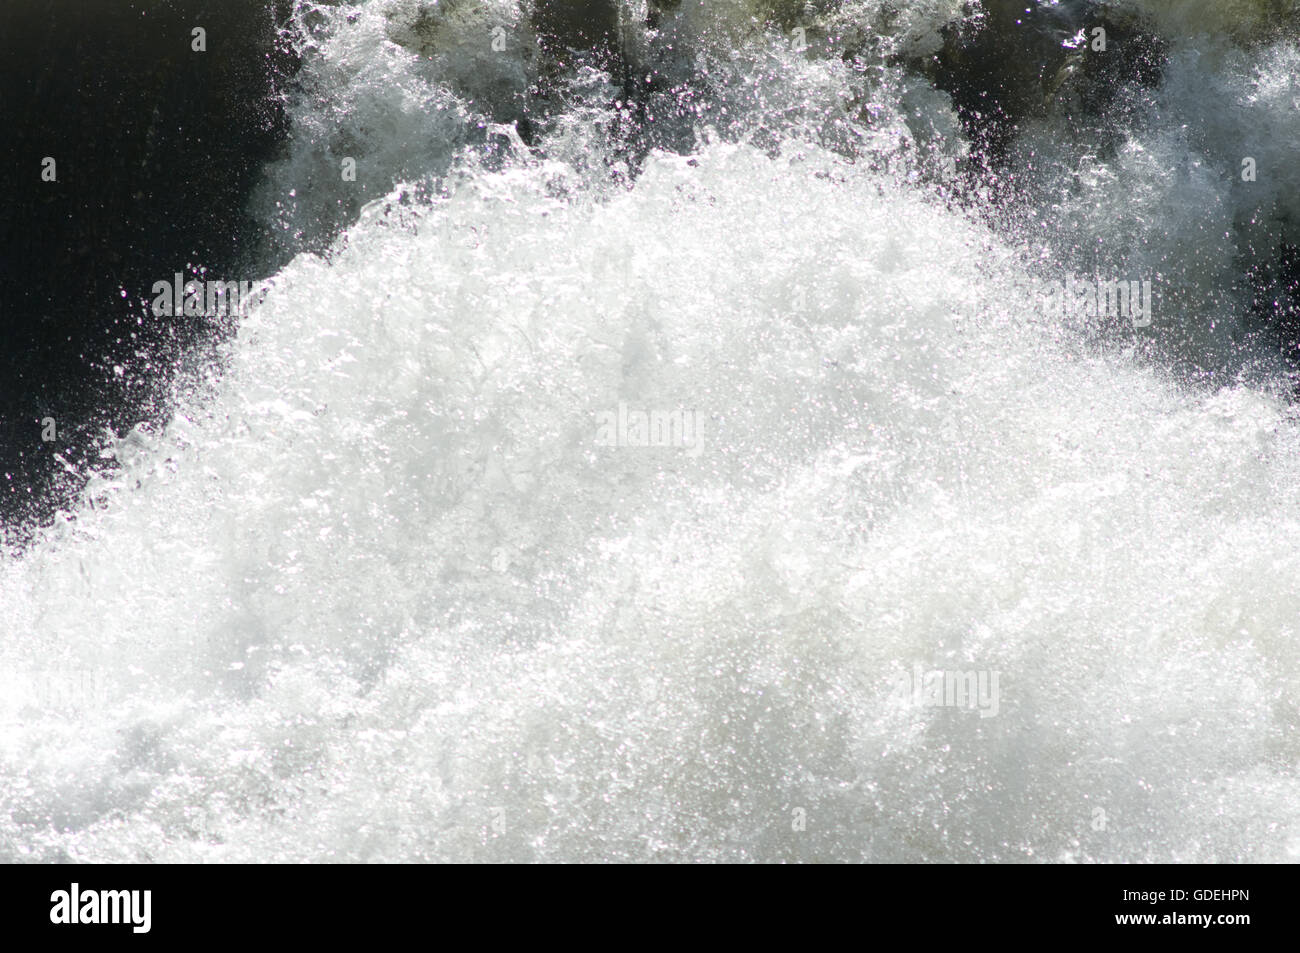 A close up study of a small waterfall and whitewater on the Skykomish River adjacent to Highway 2 in the Cascade Mountains. Stock Photo